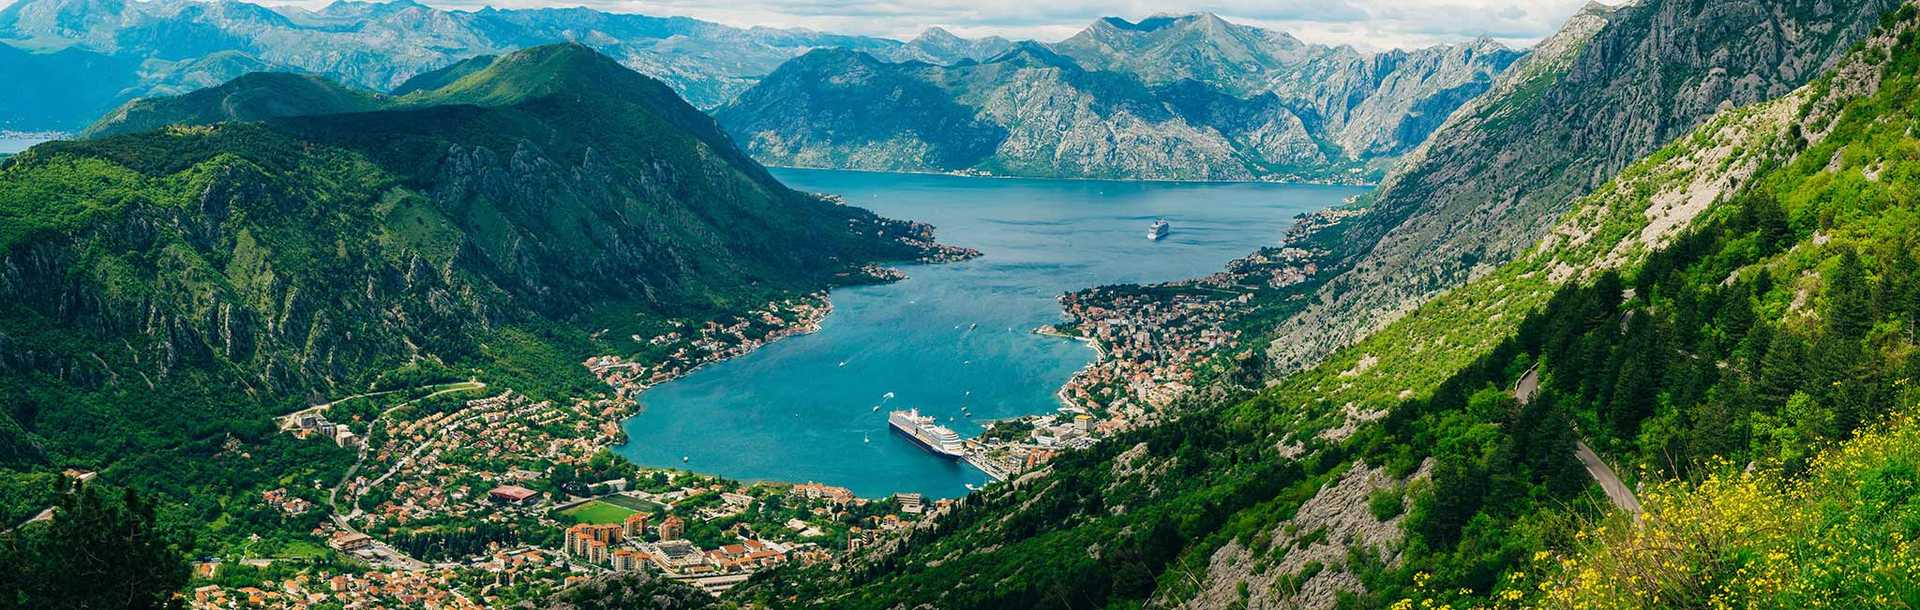 Montenegro Tours - View of Bay of Kotor from Mount Lovcen